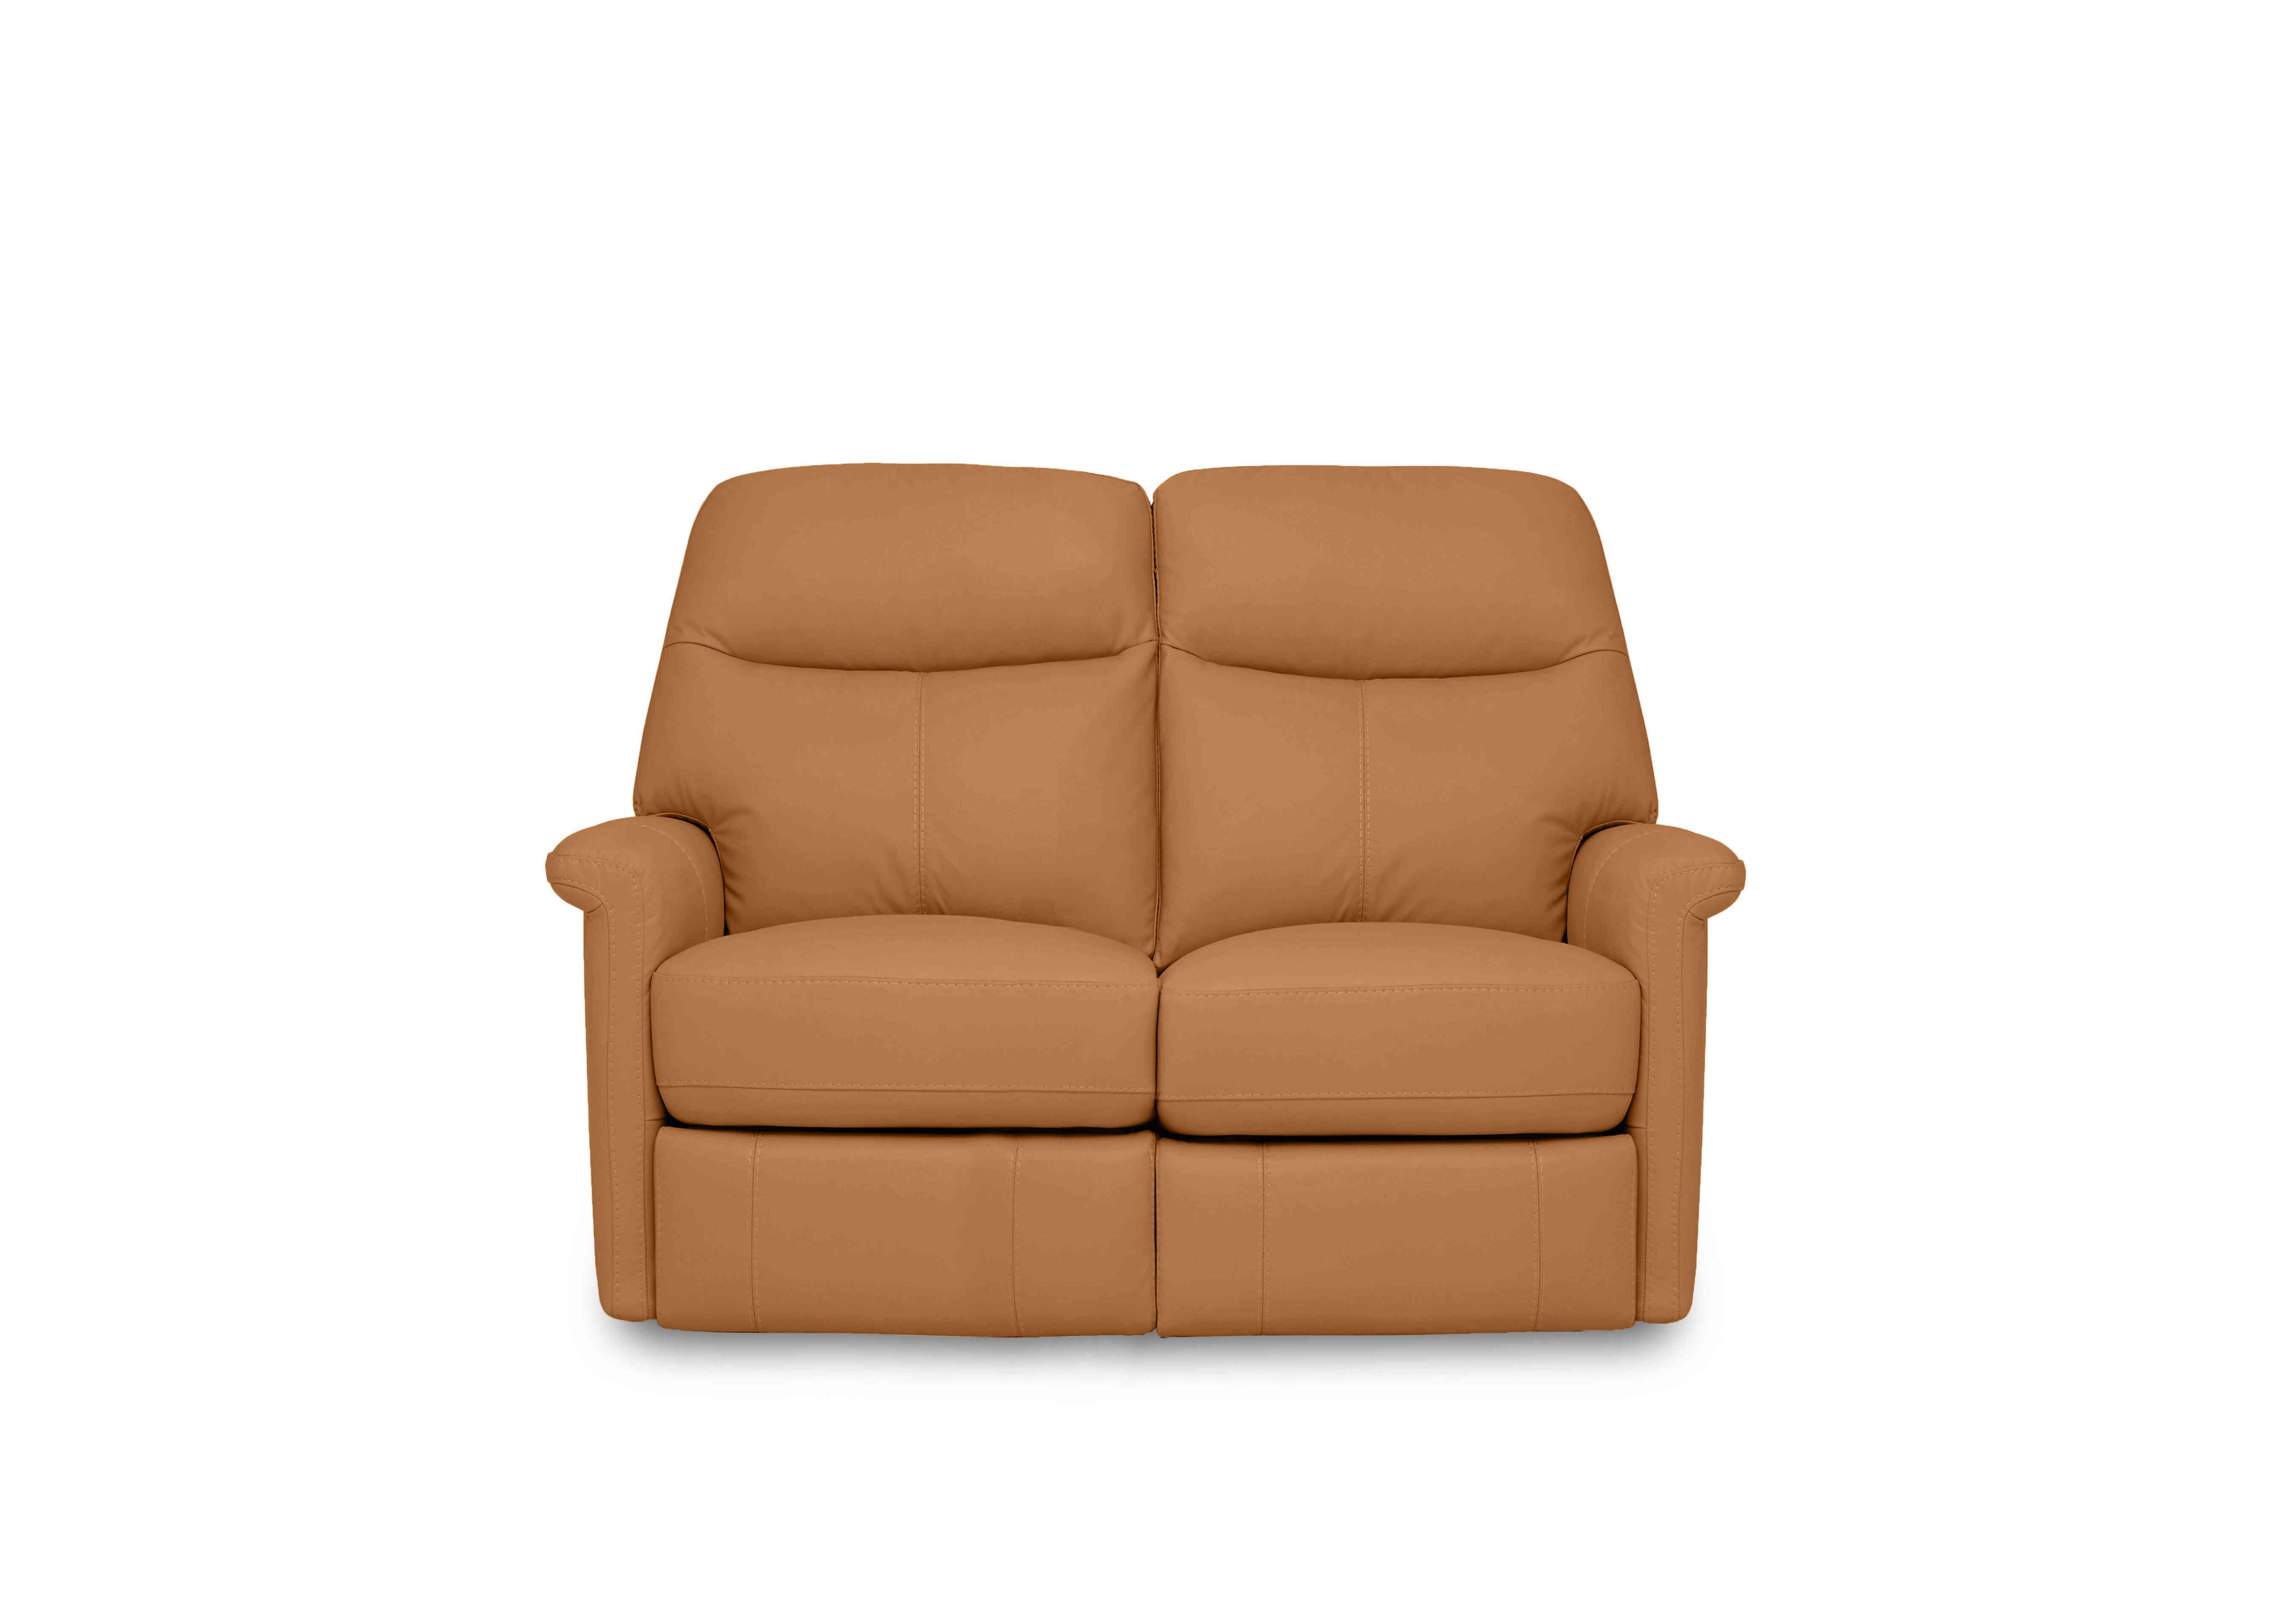 Compact Collection Lille 2 Seater Leather Sofa in Bv-335e Honey Yellow on Furniture Village